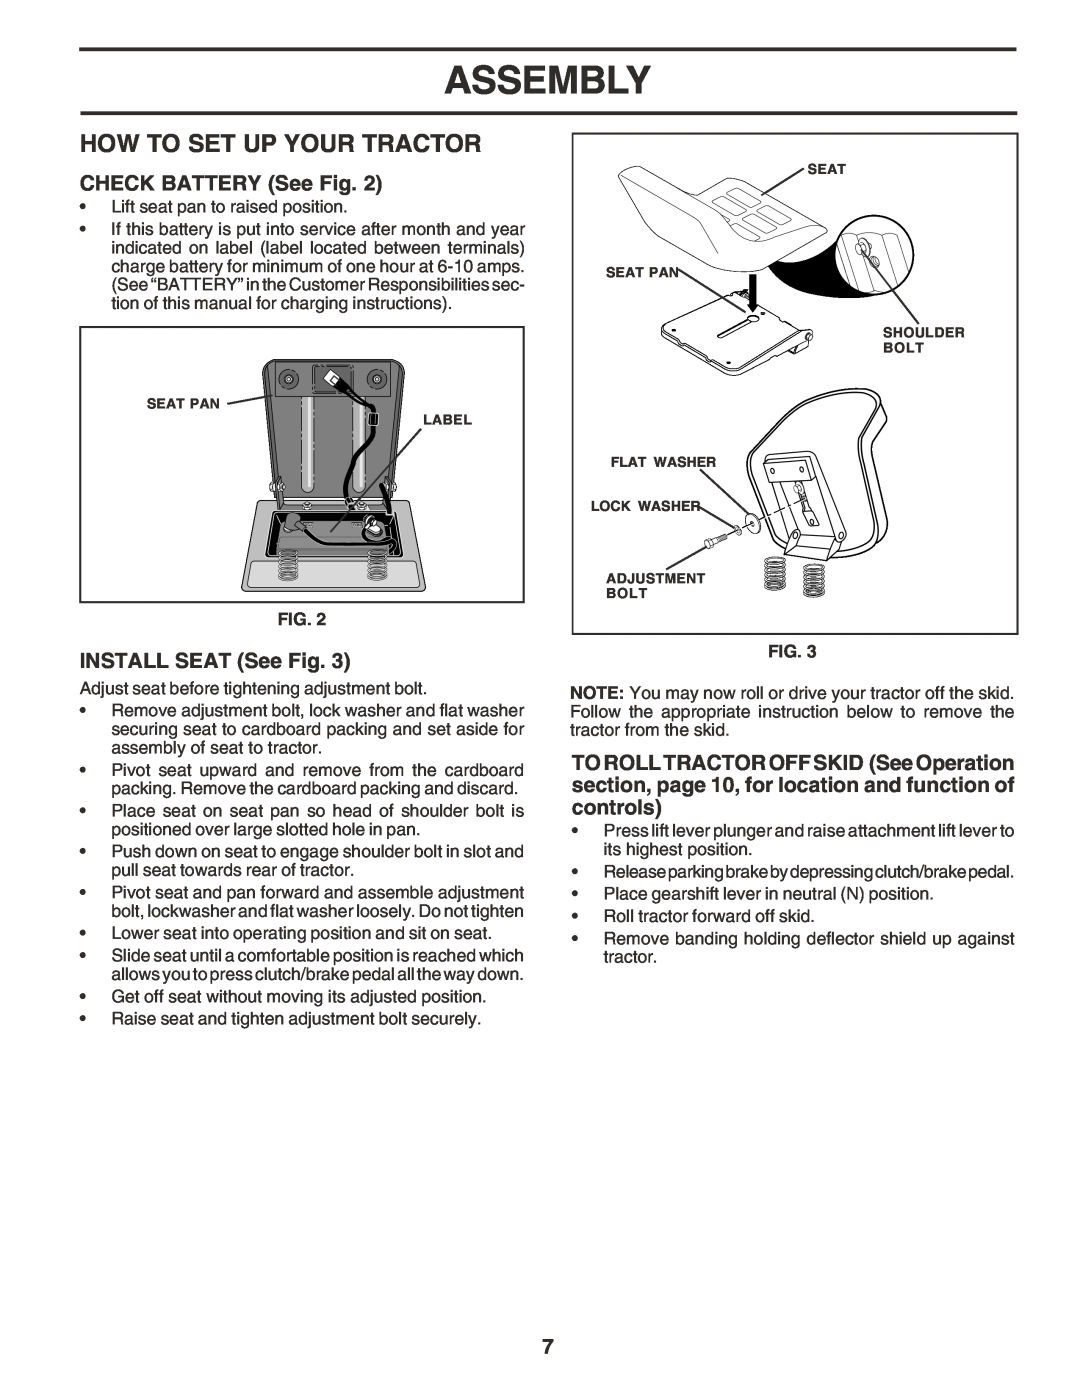 Weed Eater WE12538L manual How To Set Up Your Tractor, CHECK BATTERY See Fig, INSTALL SEAT See Fig, Assembly 